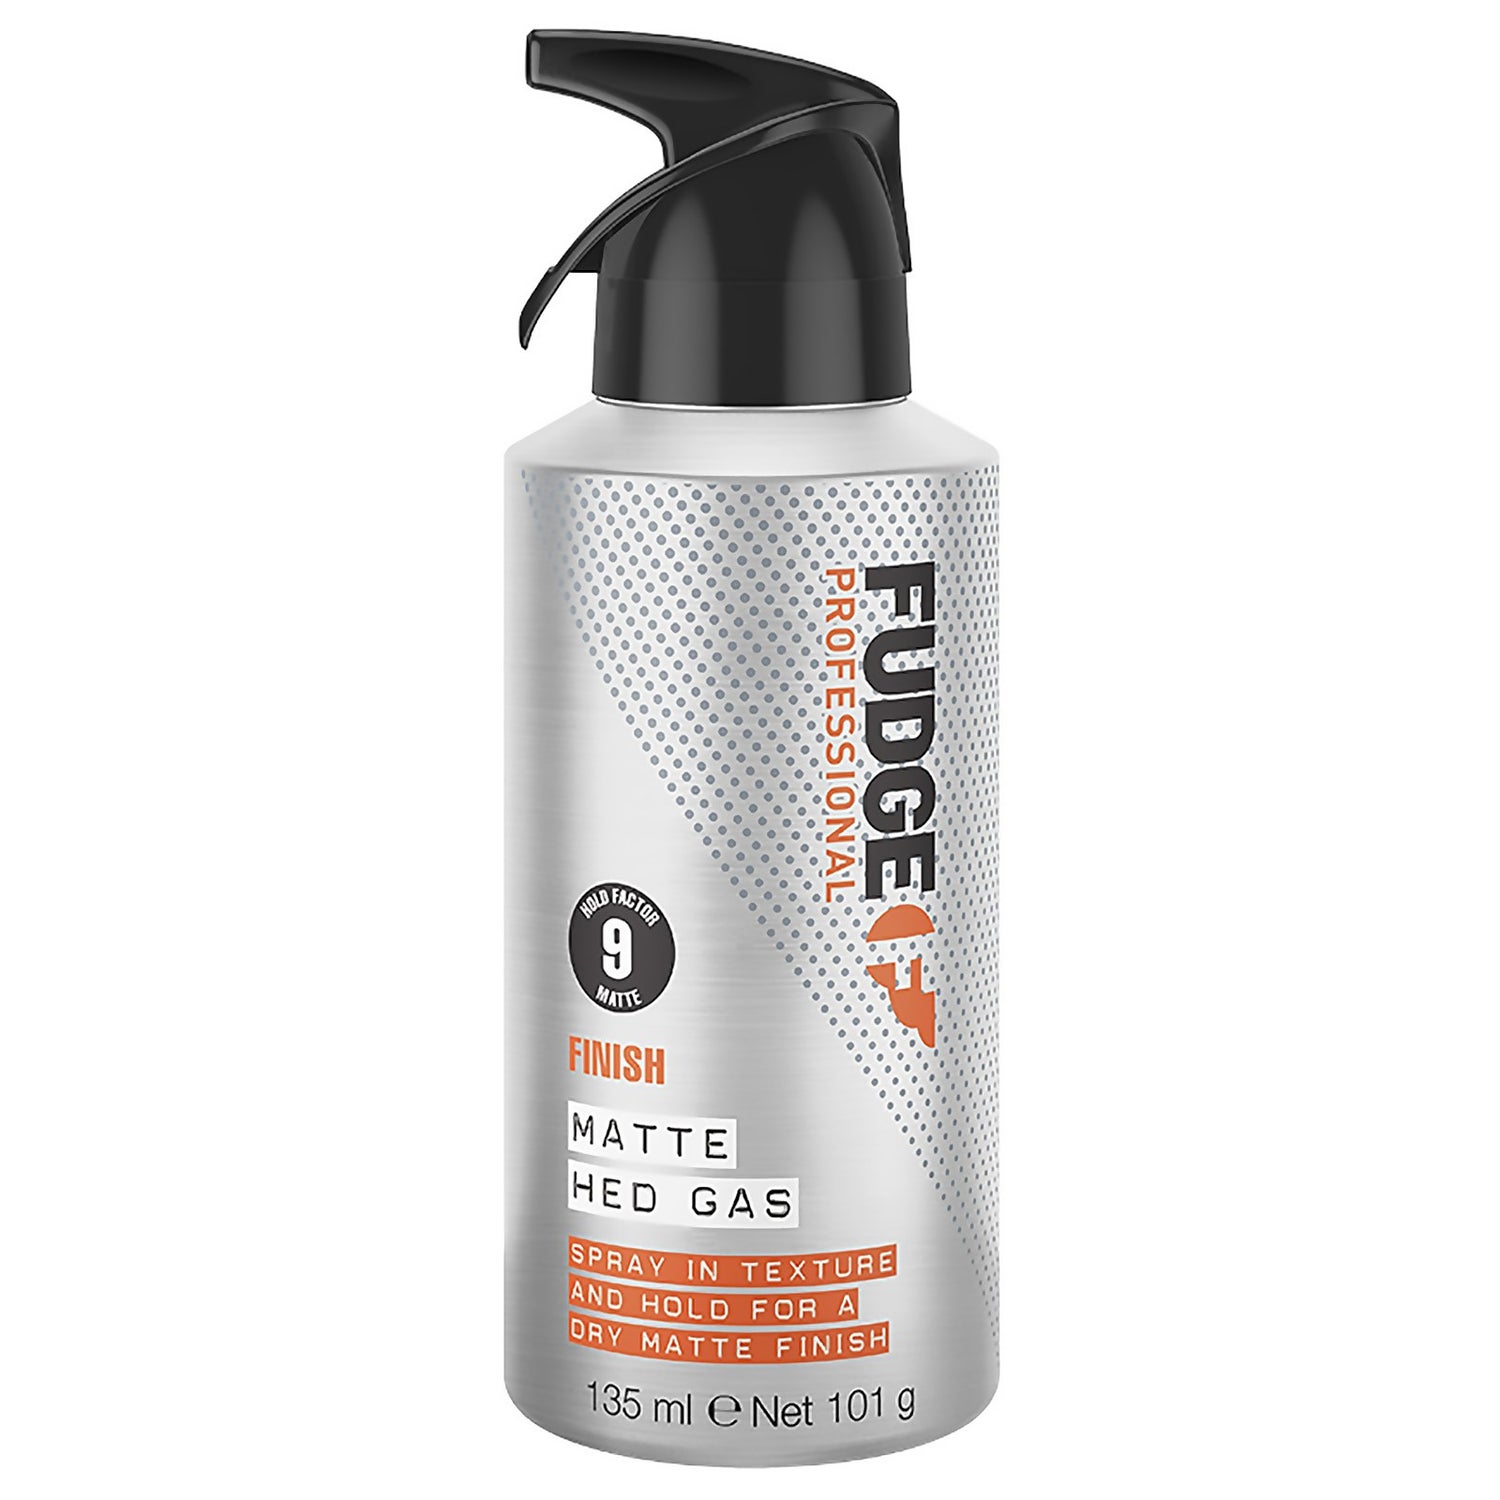 Matte Hed Gas 150ml